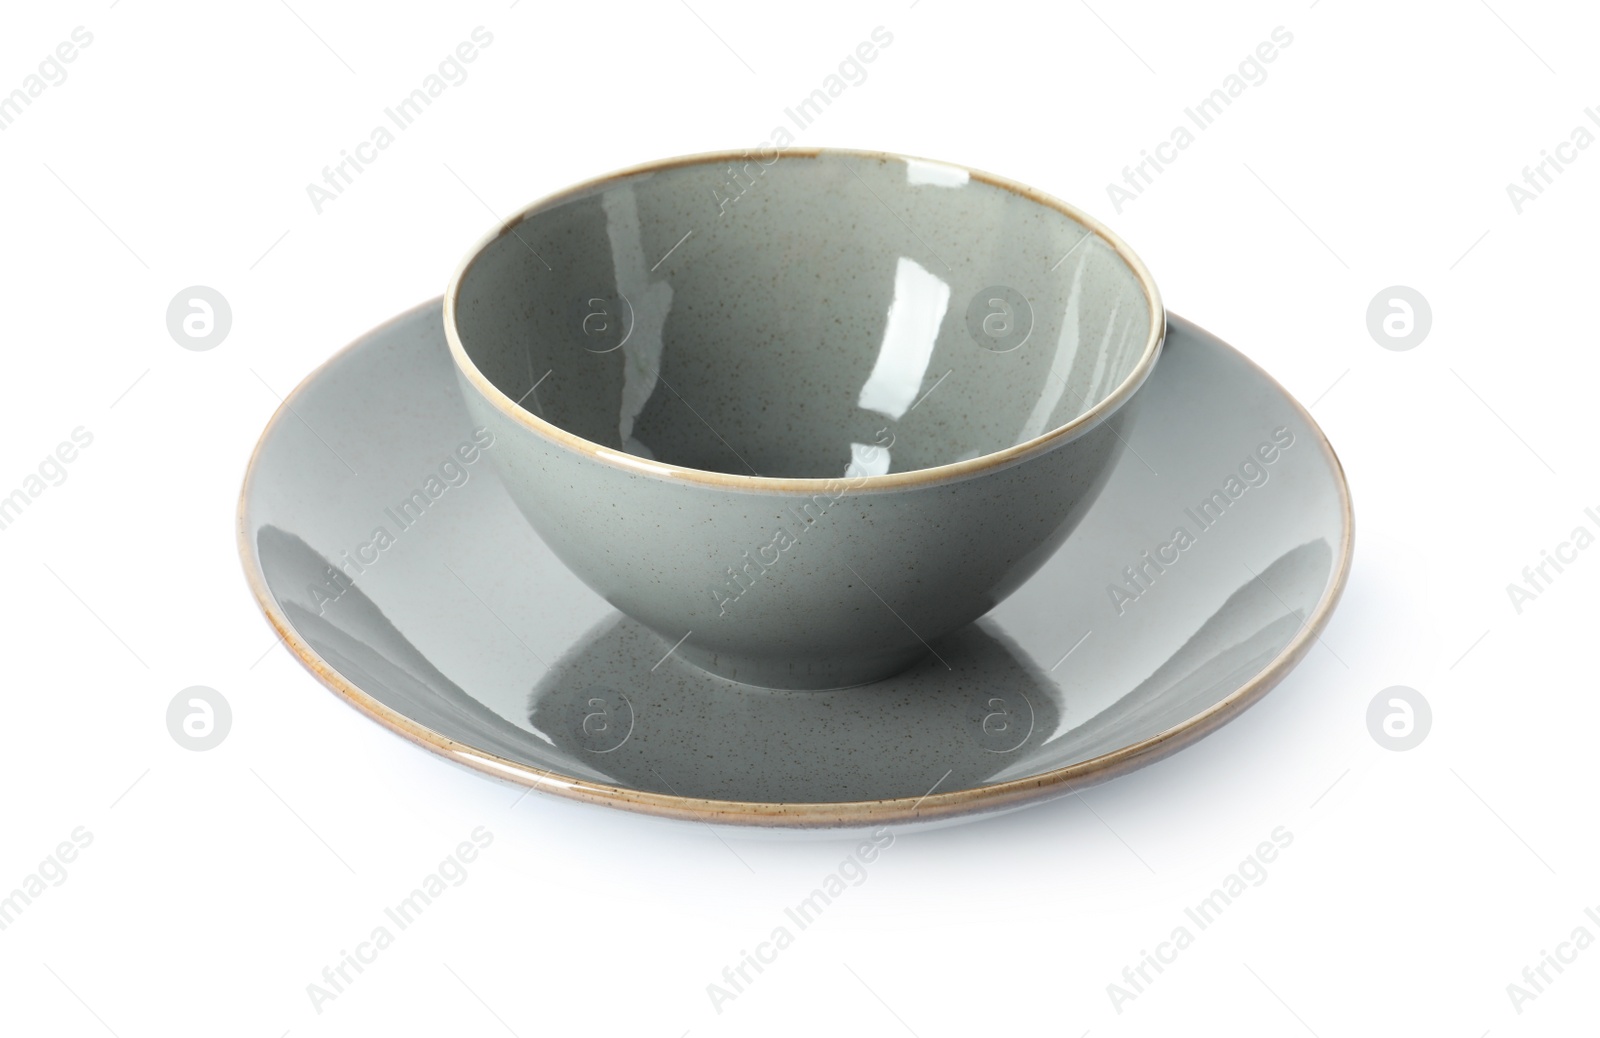 Photo of New grey ceramic plate and bowl on white background